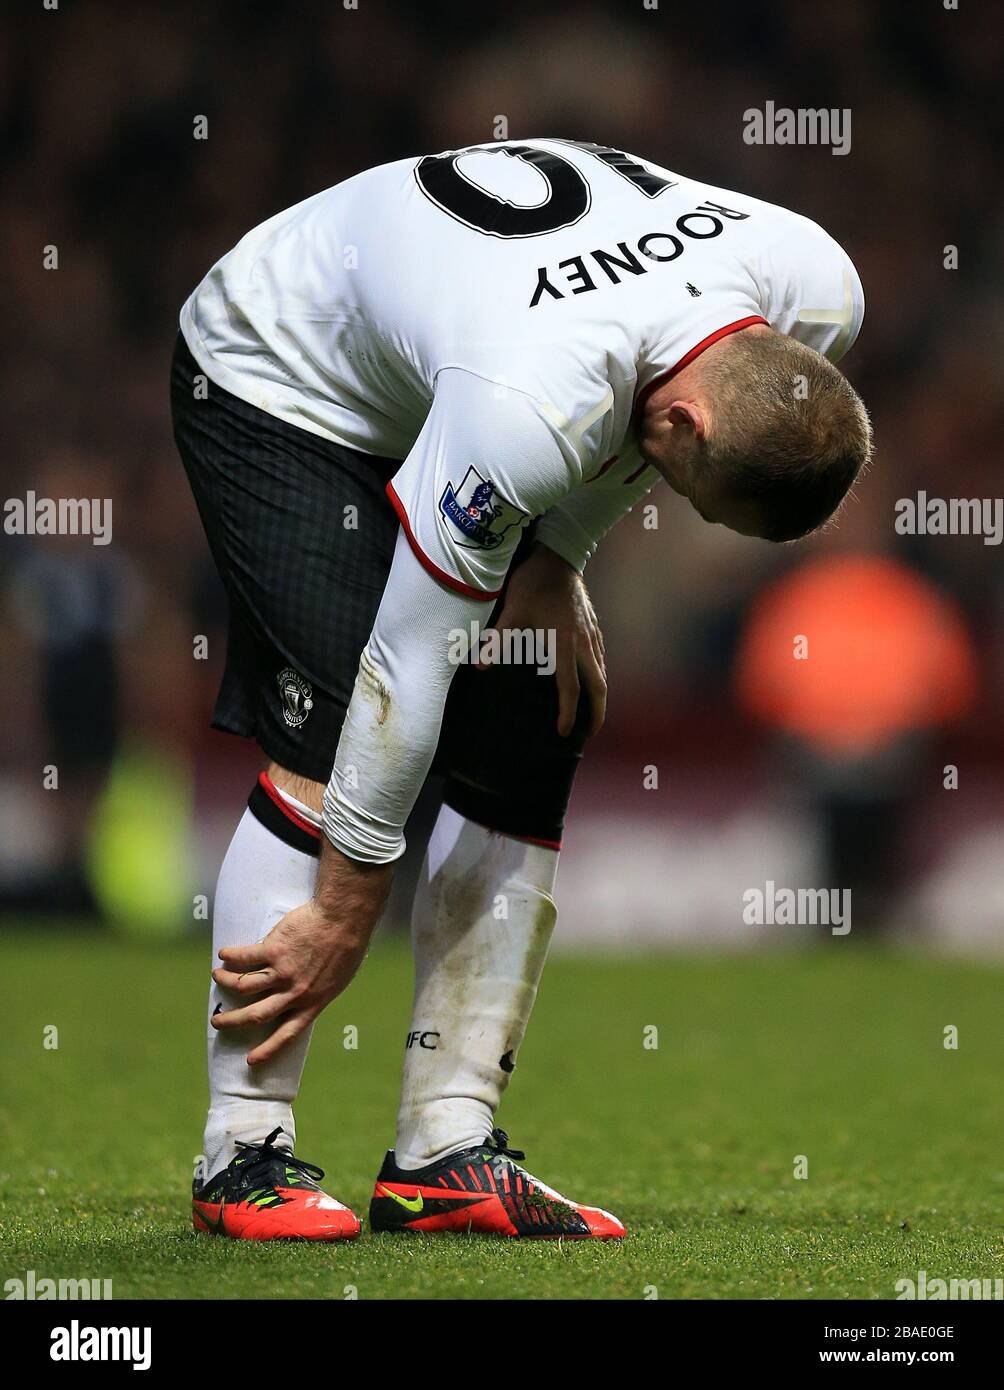 Manchester United's Wayne Rooney struggles after picking up an injury Stock Photo